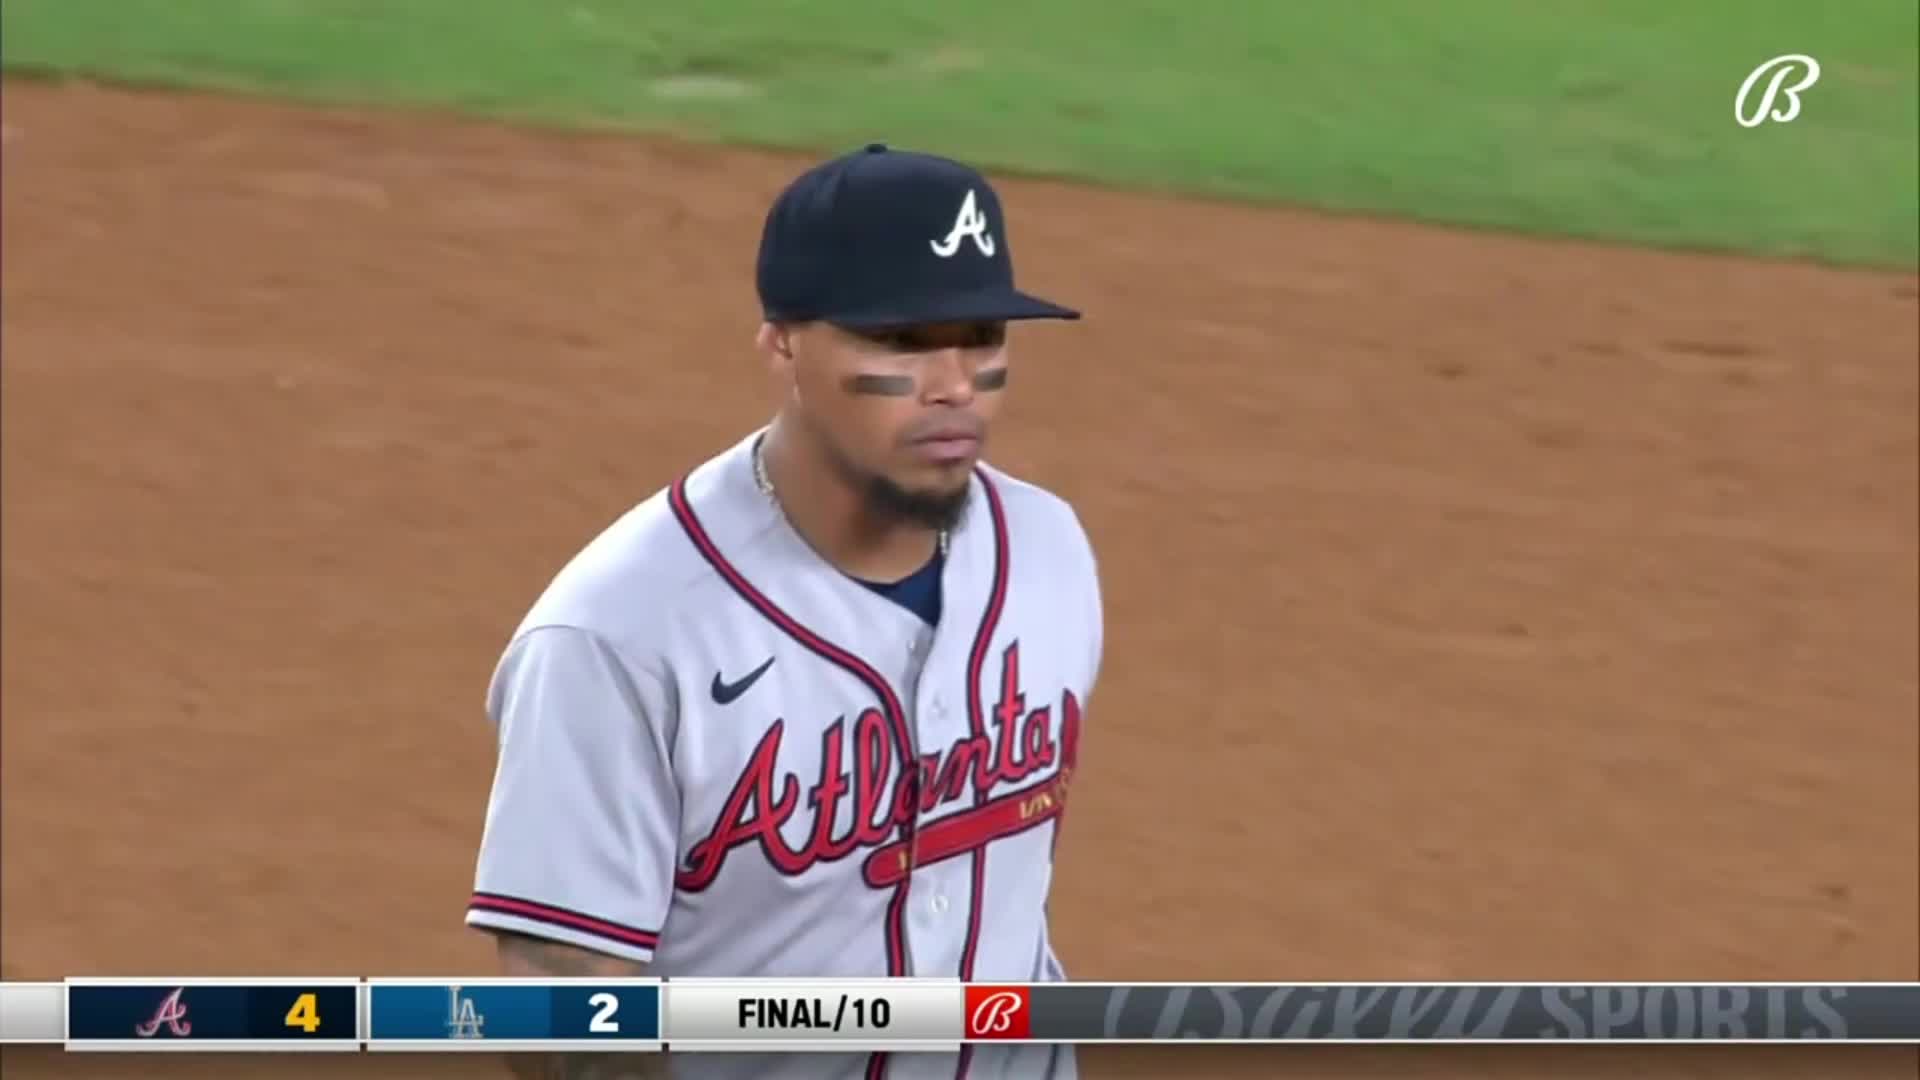 Highlight Raisel Iglesias records the save as the Braves take game three against the Dodgers, the series win, and the season series win